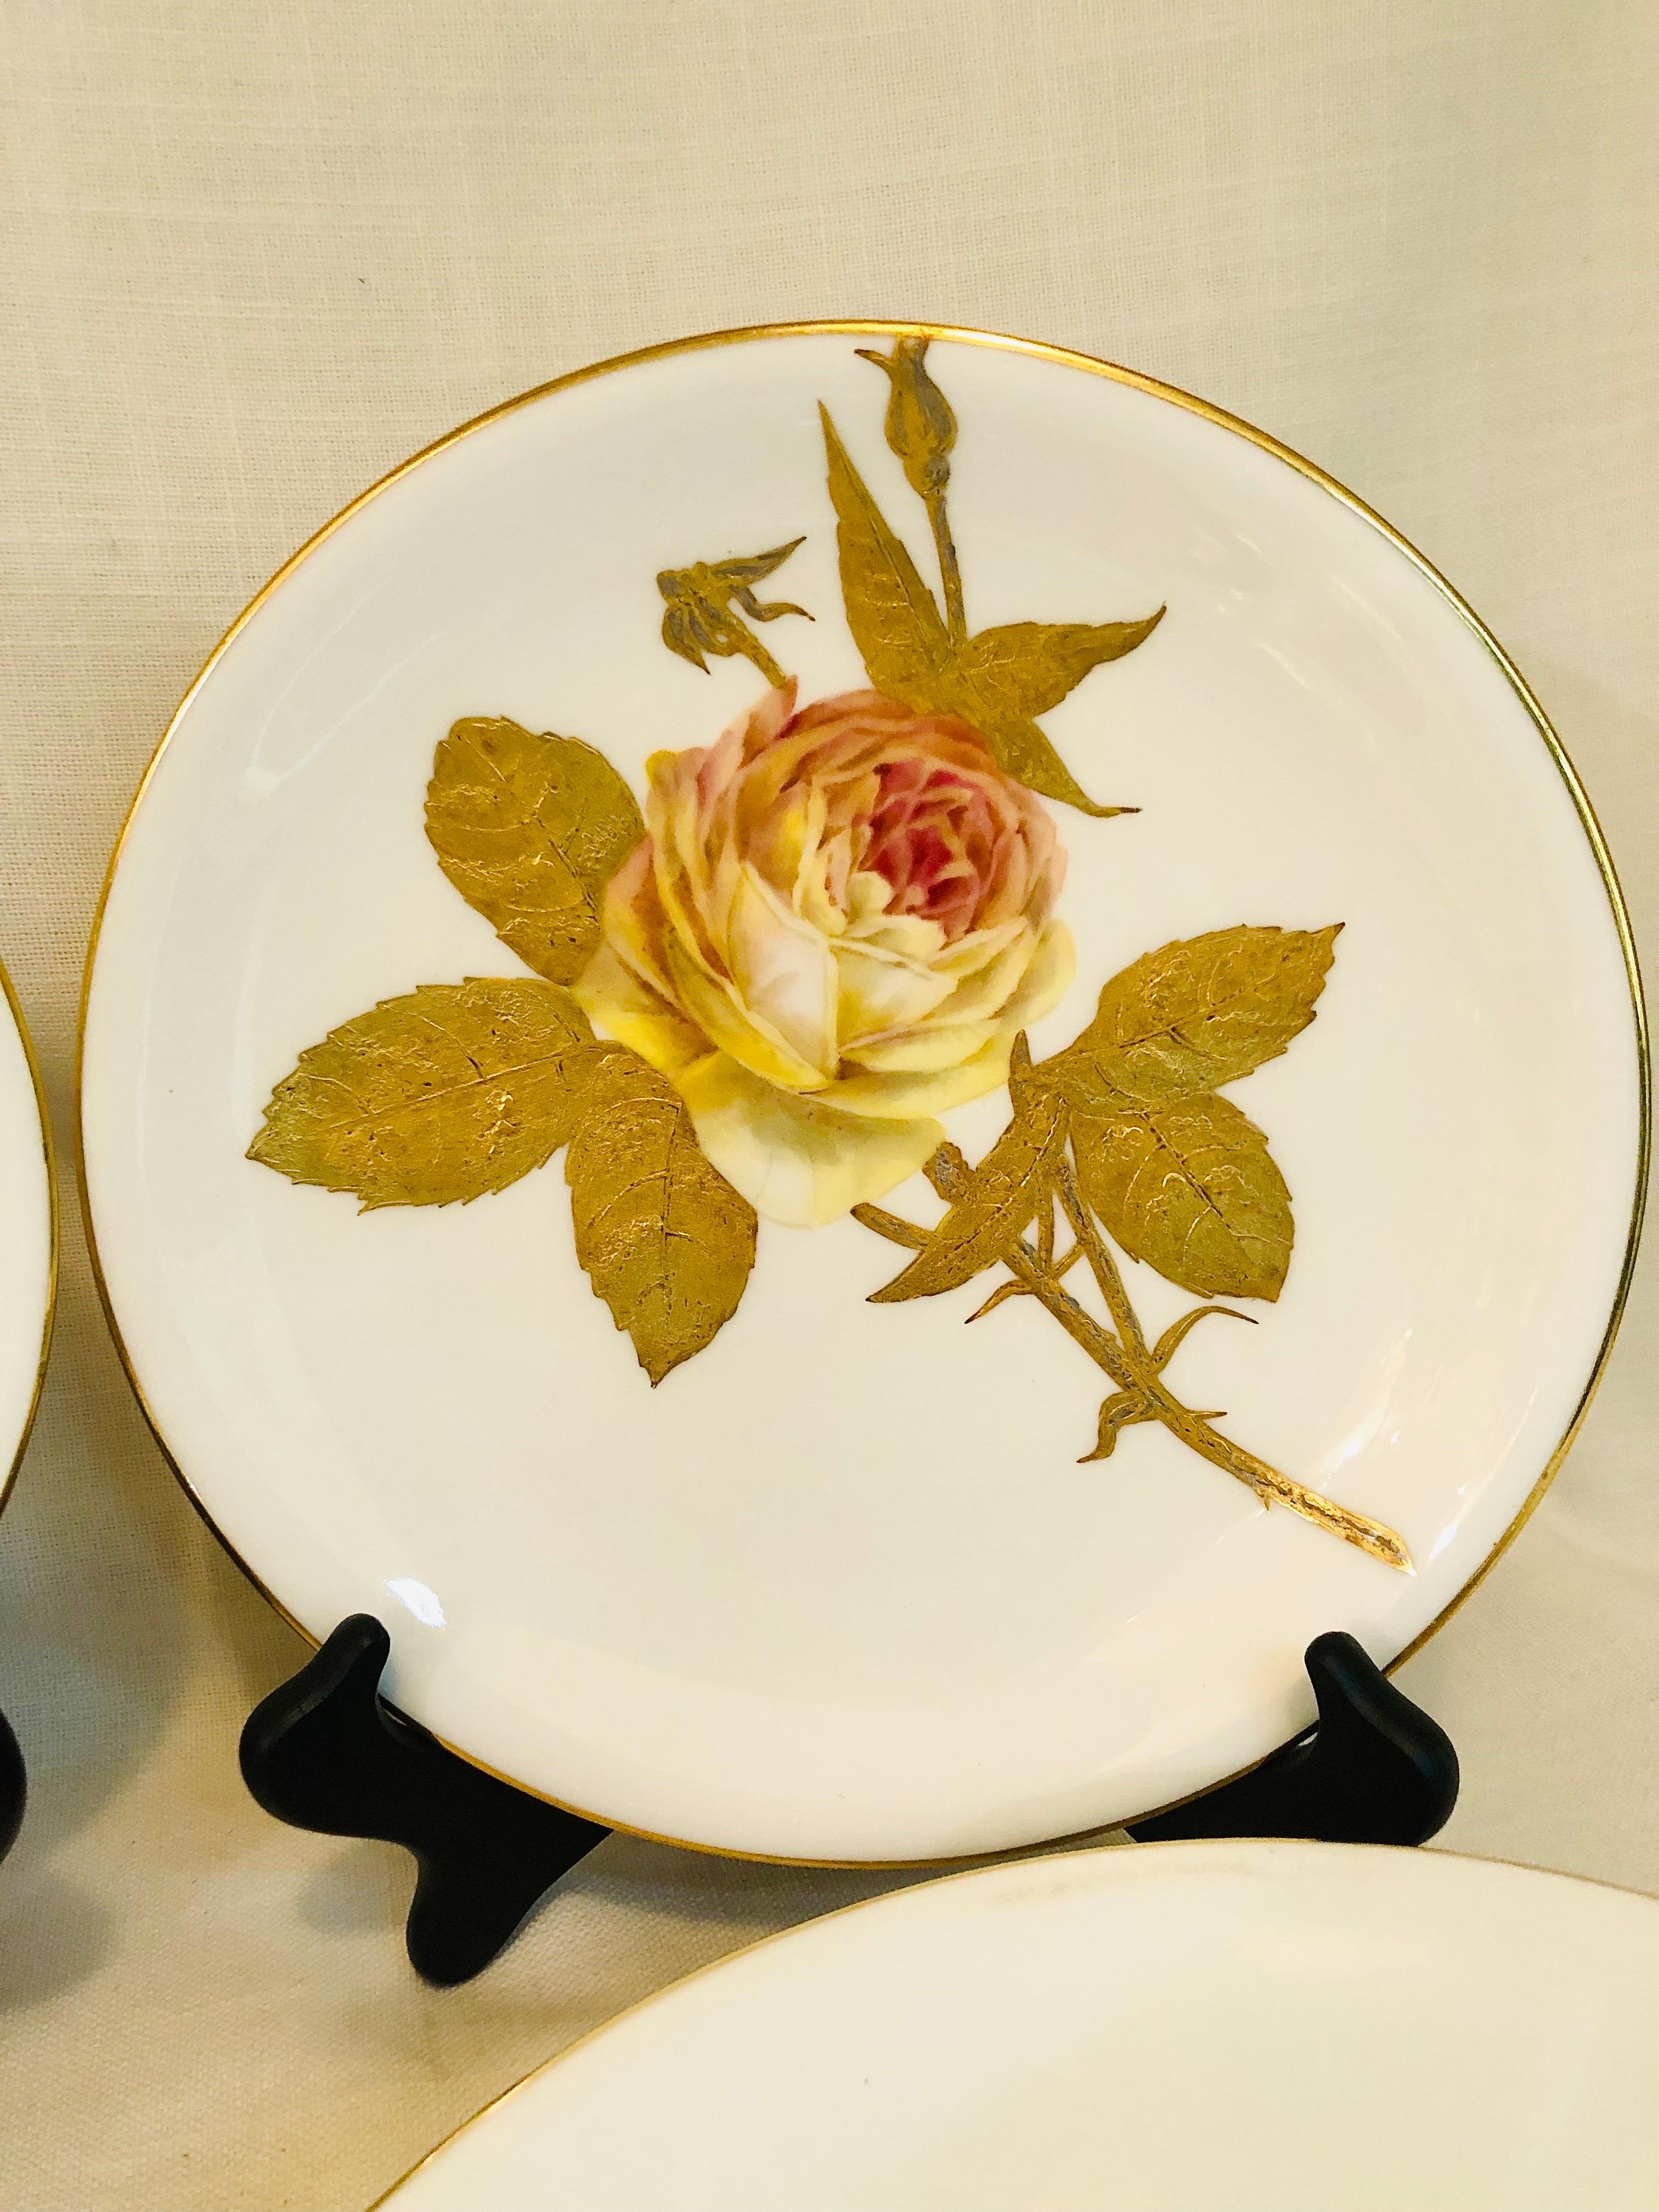 English Minton Plates Each Painted With a Different Rose With Gold and Platinum Accents